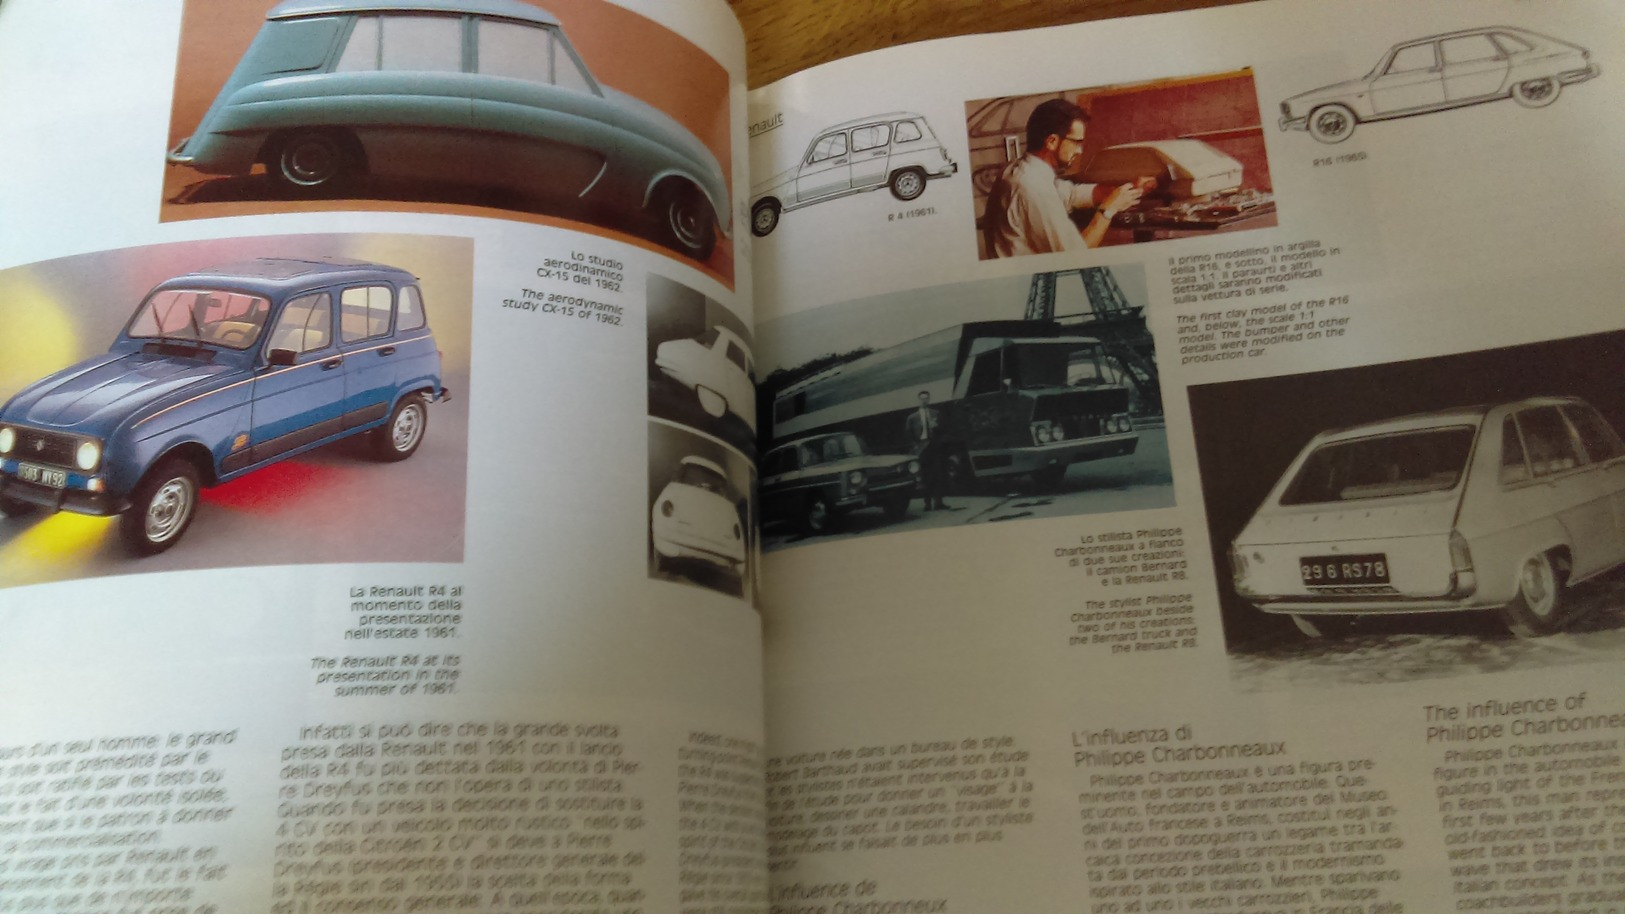 94/ AUTO ET DESIGN 47 CONCETTO ARCHITETTURA IMMAGINE NINETY YEARS OF RENAULT STYLE